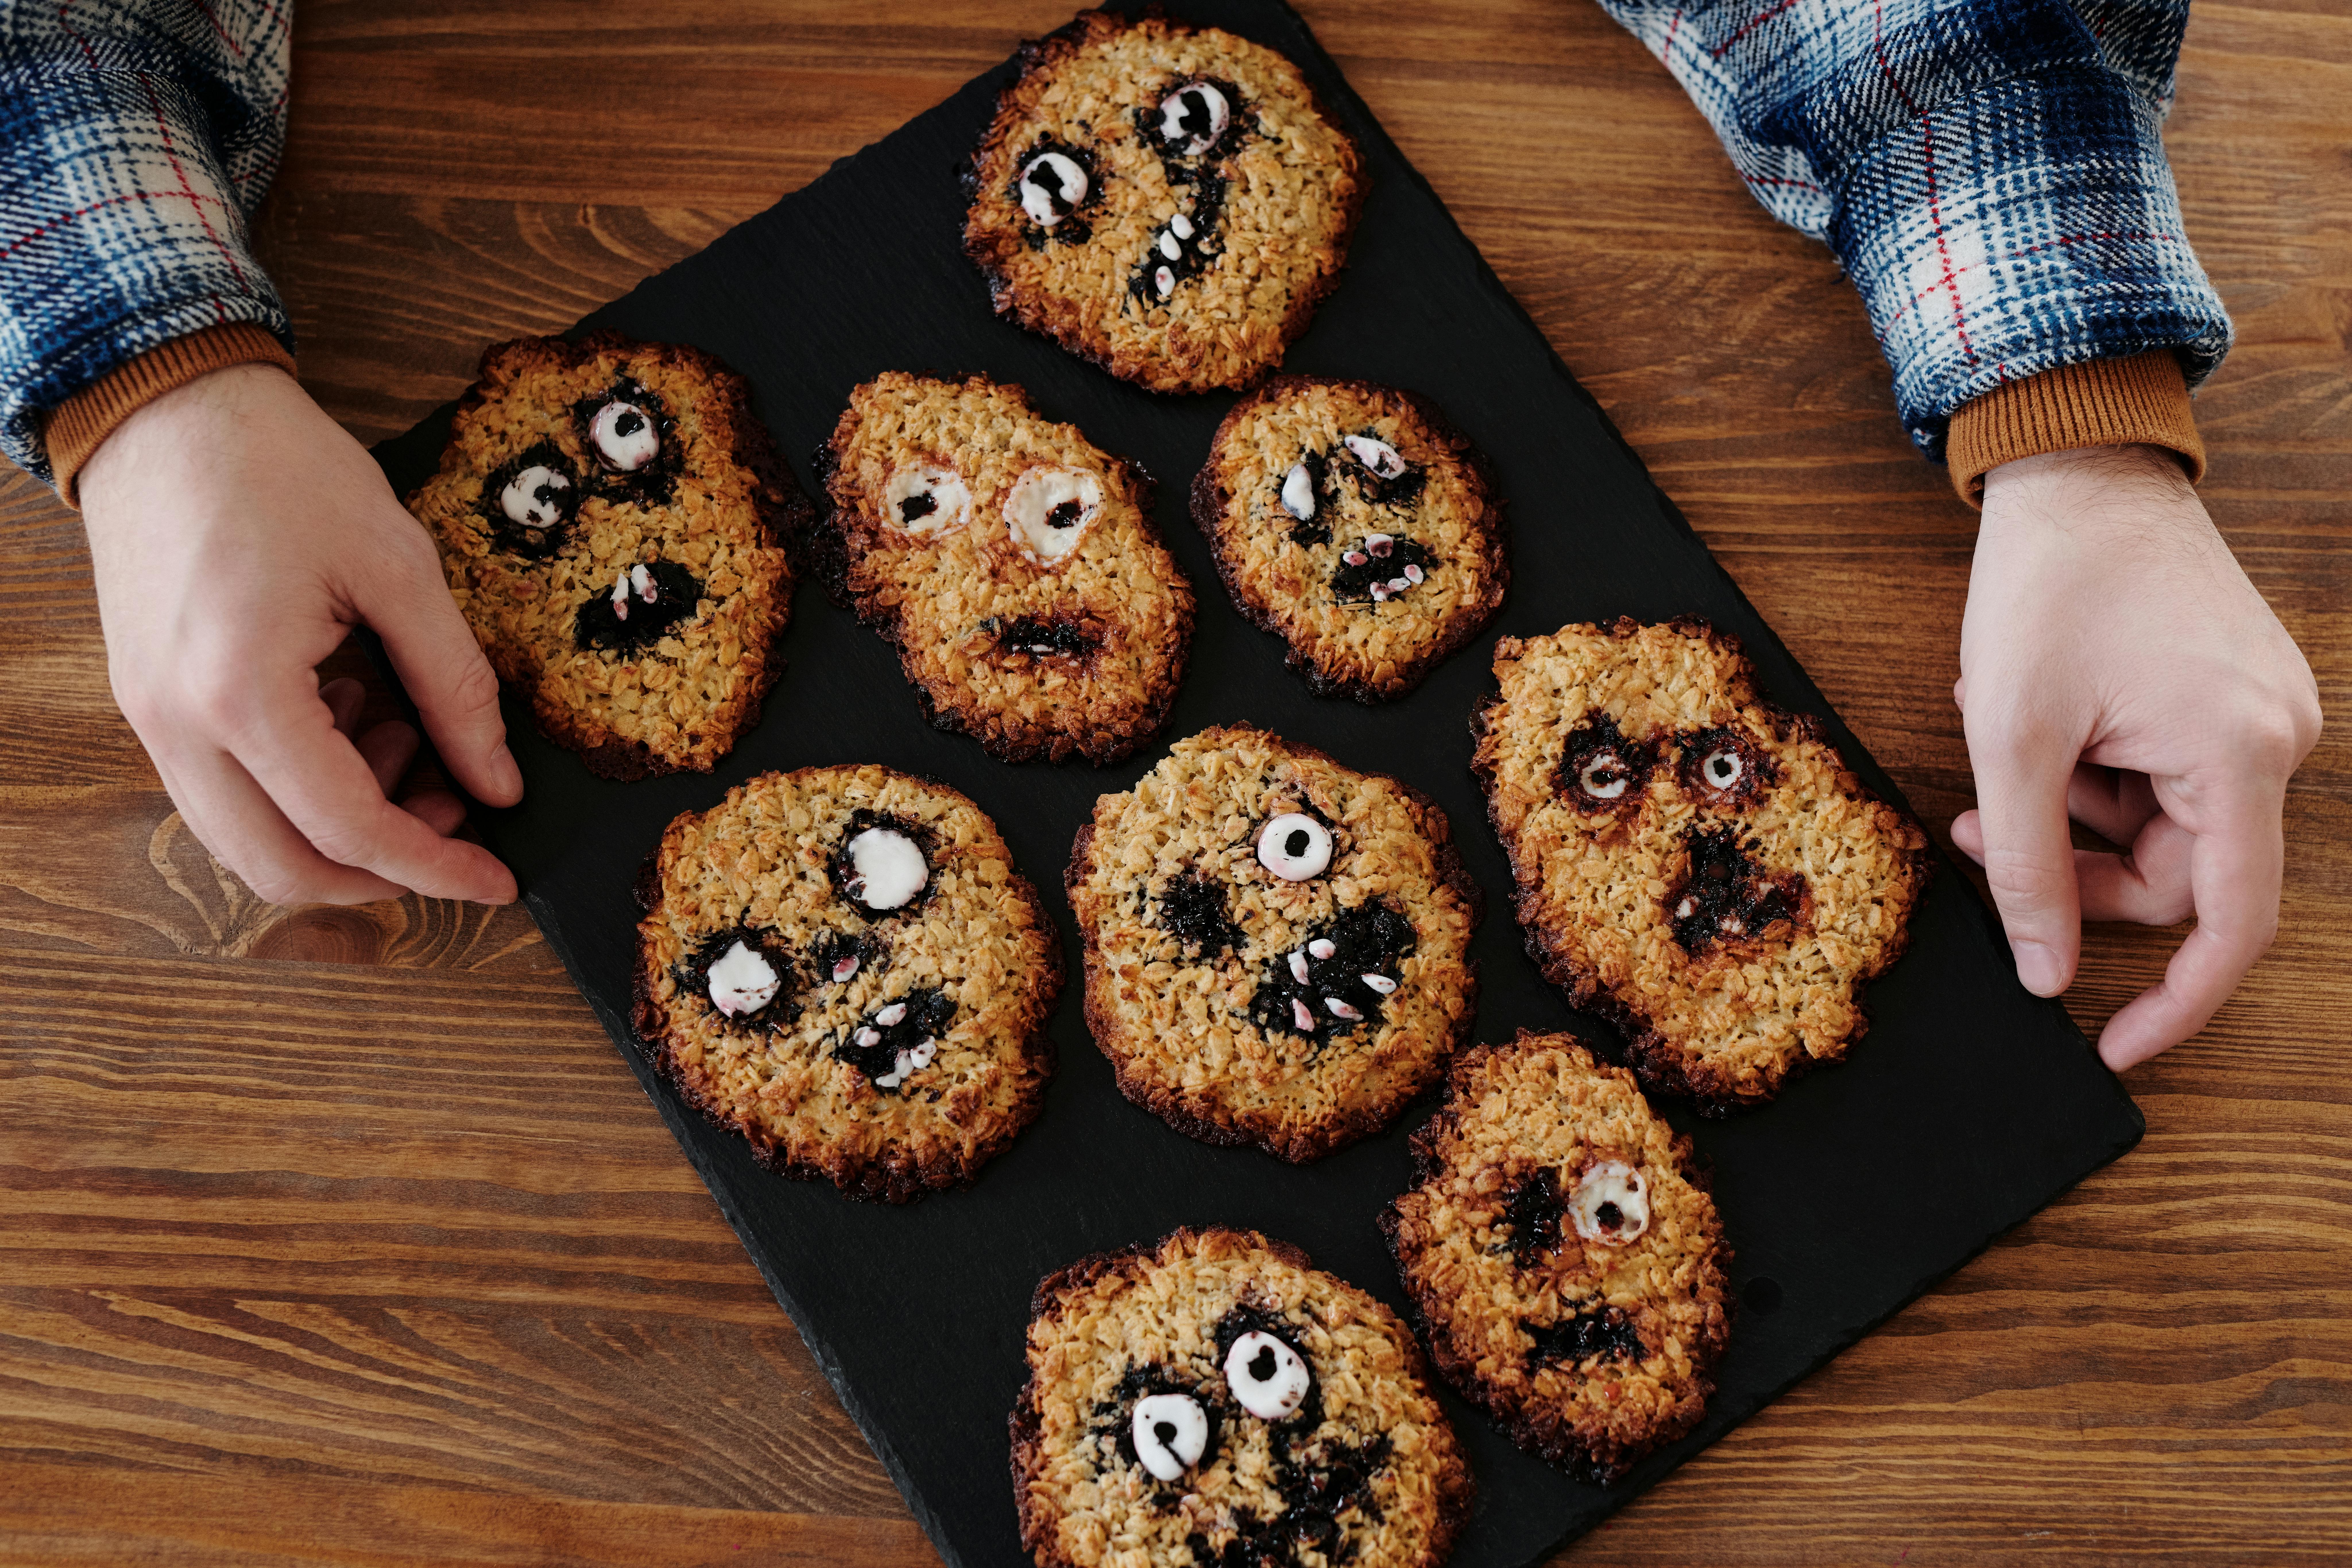 For illustration purposes only. A tray of homemade cookies | Source: Pexels